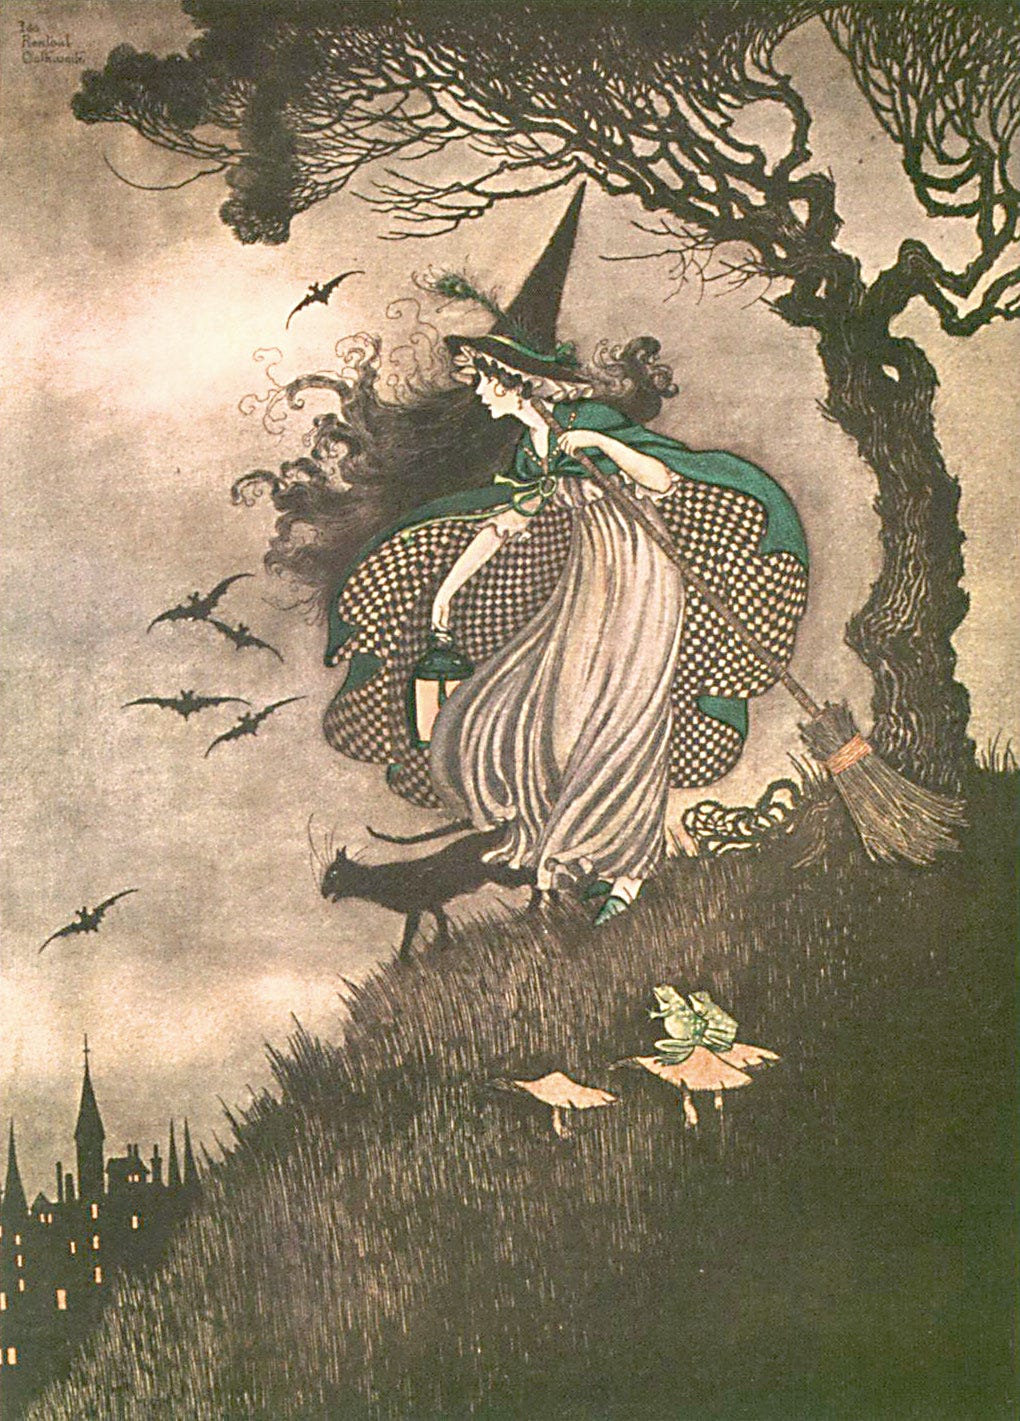 A witch and her familiars, a cat and two toads, stand on a windswept hillside